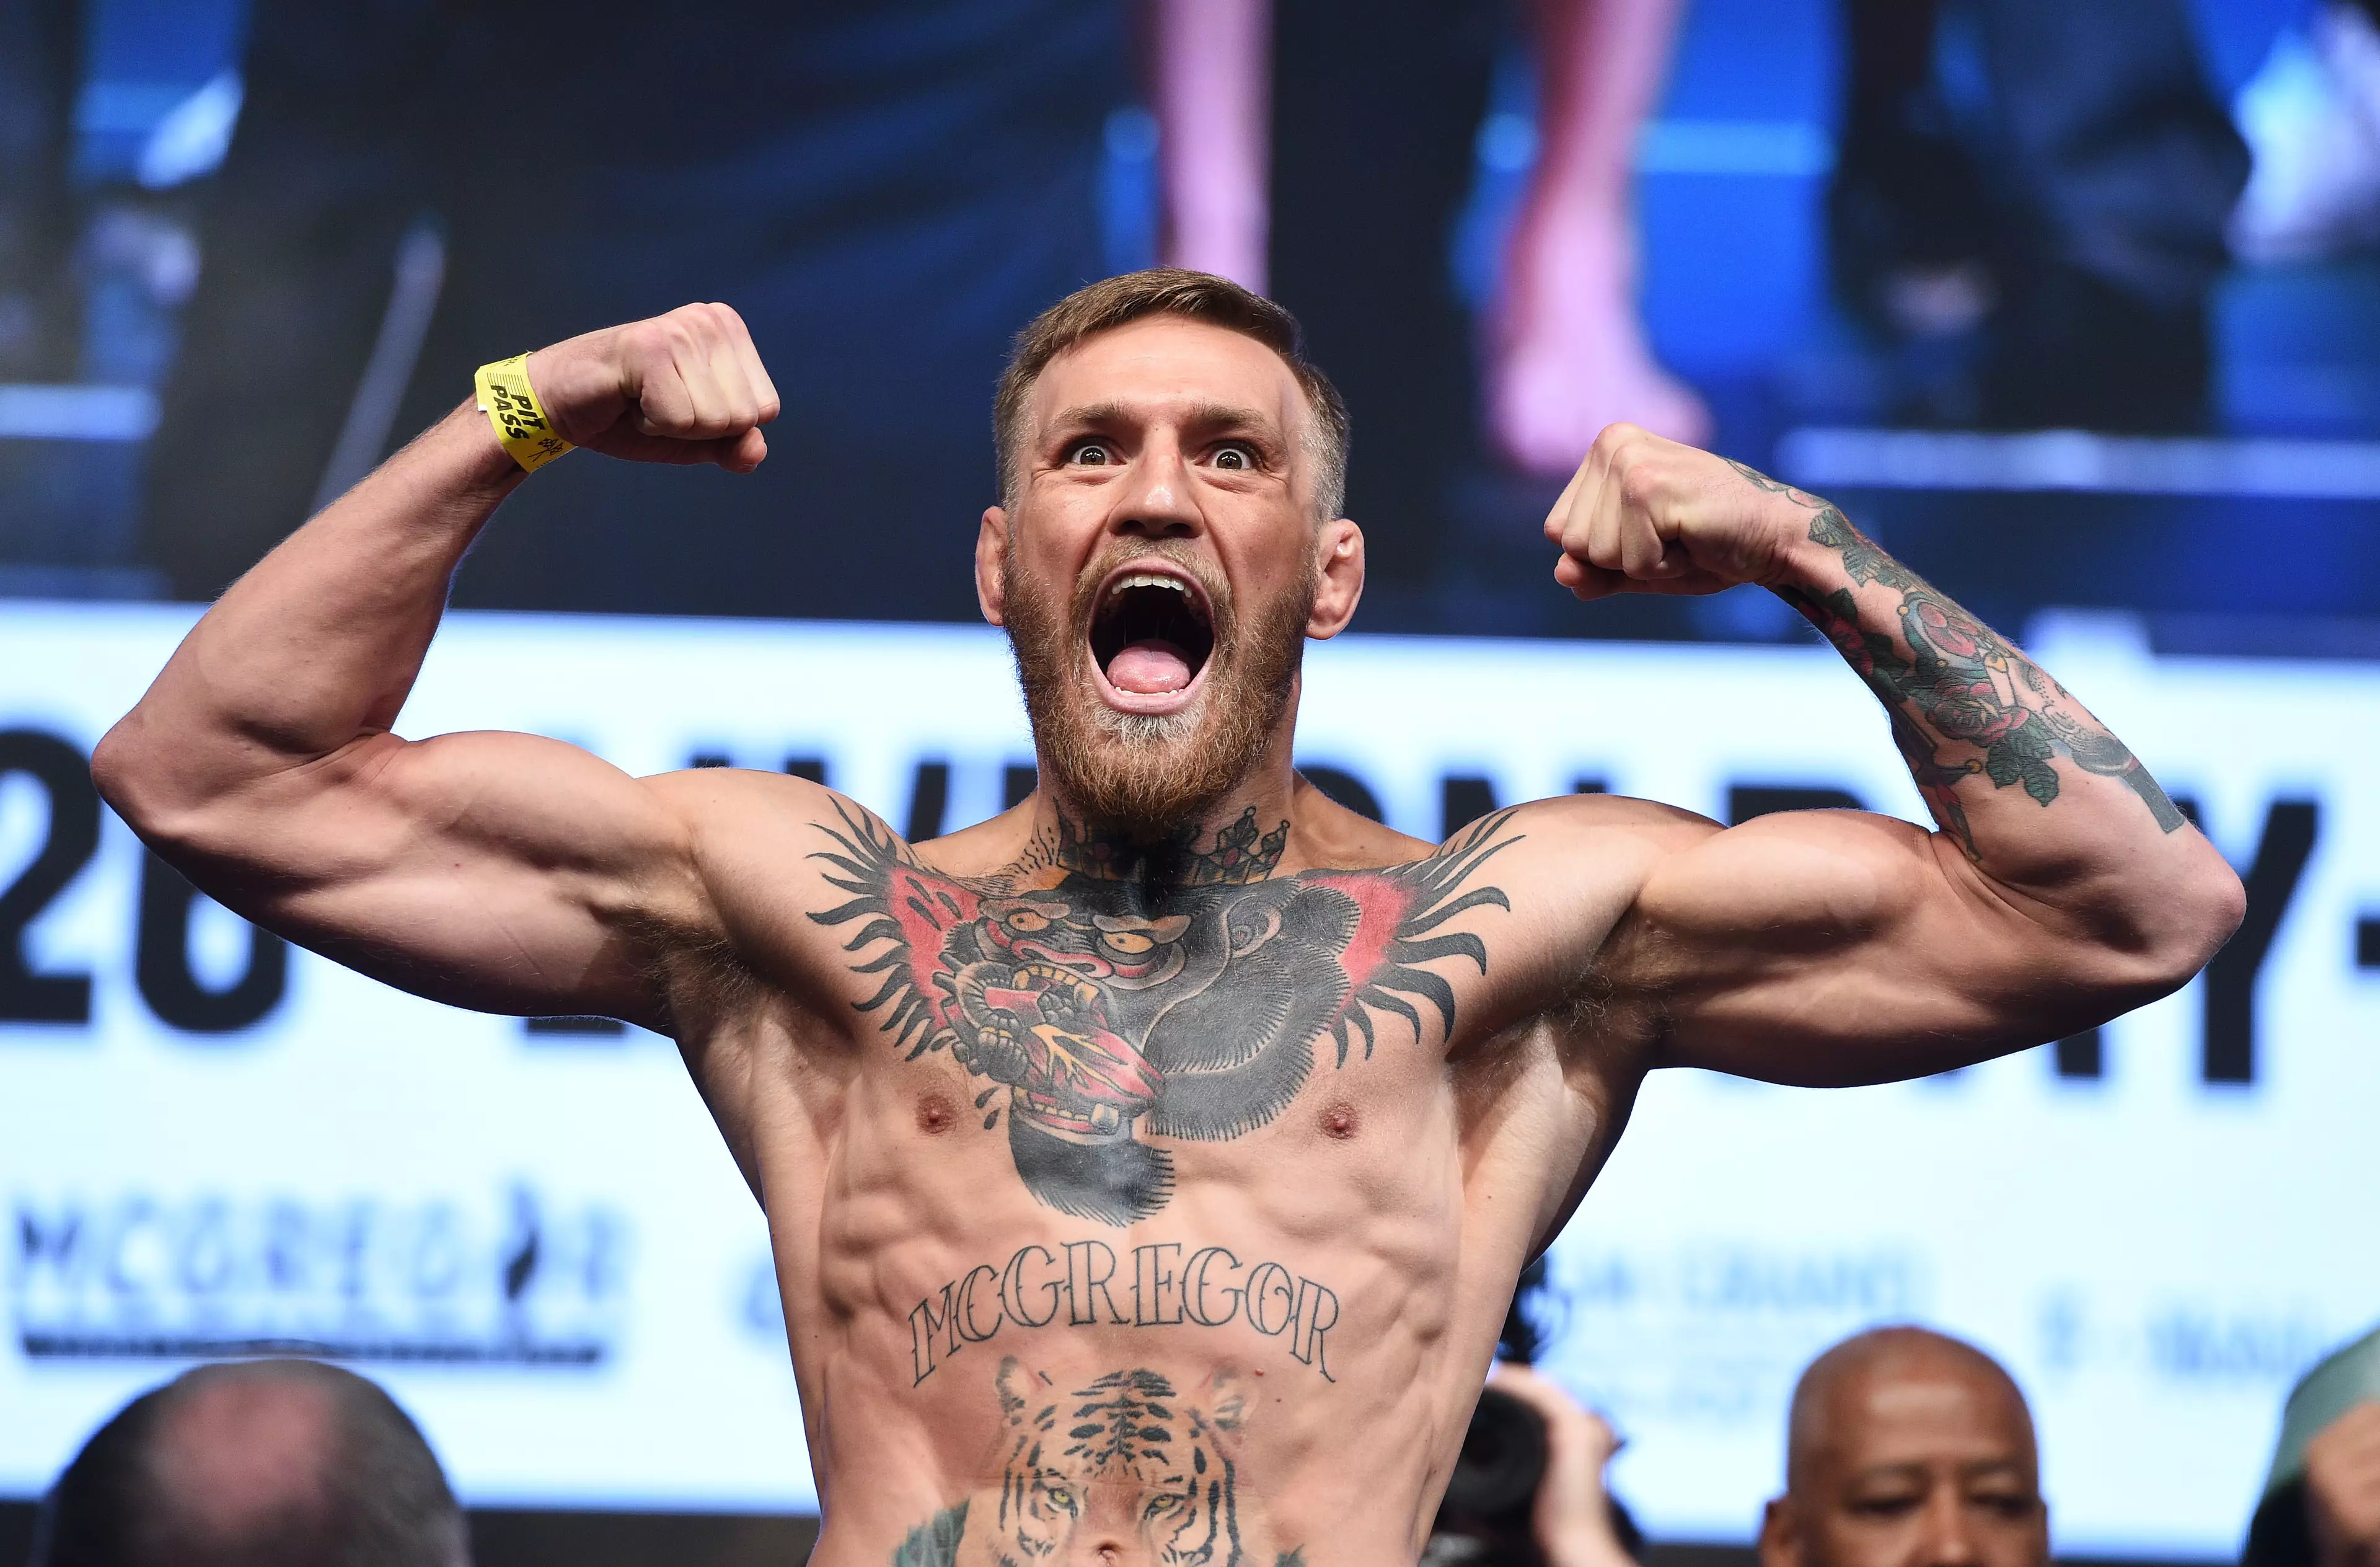 Are you excited to see McGregor back in the octagon? Image: PA Images